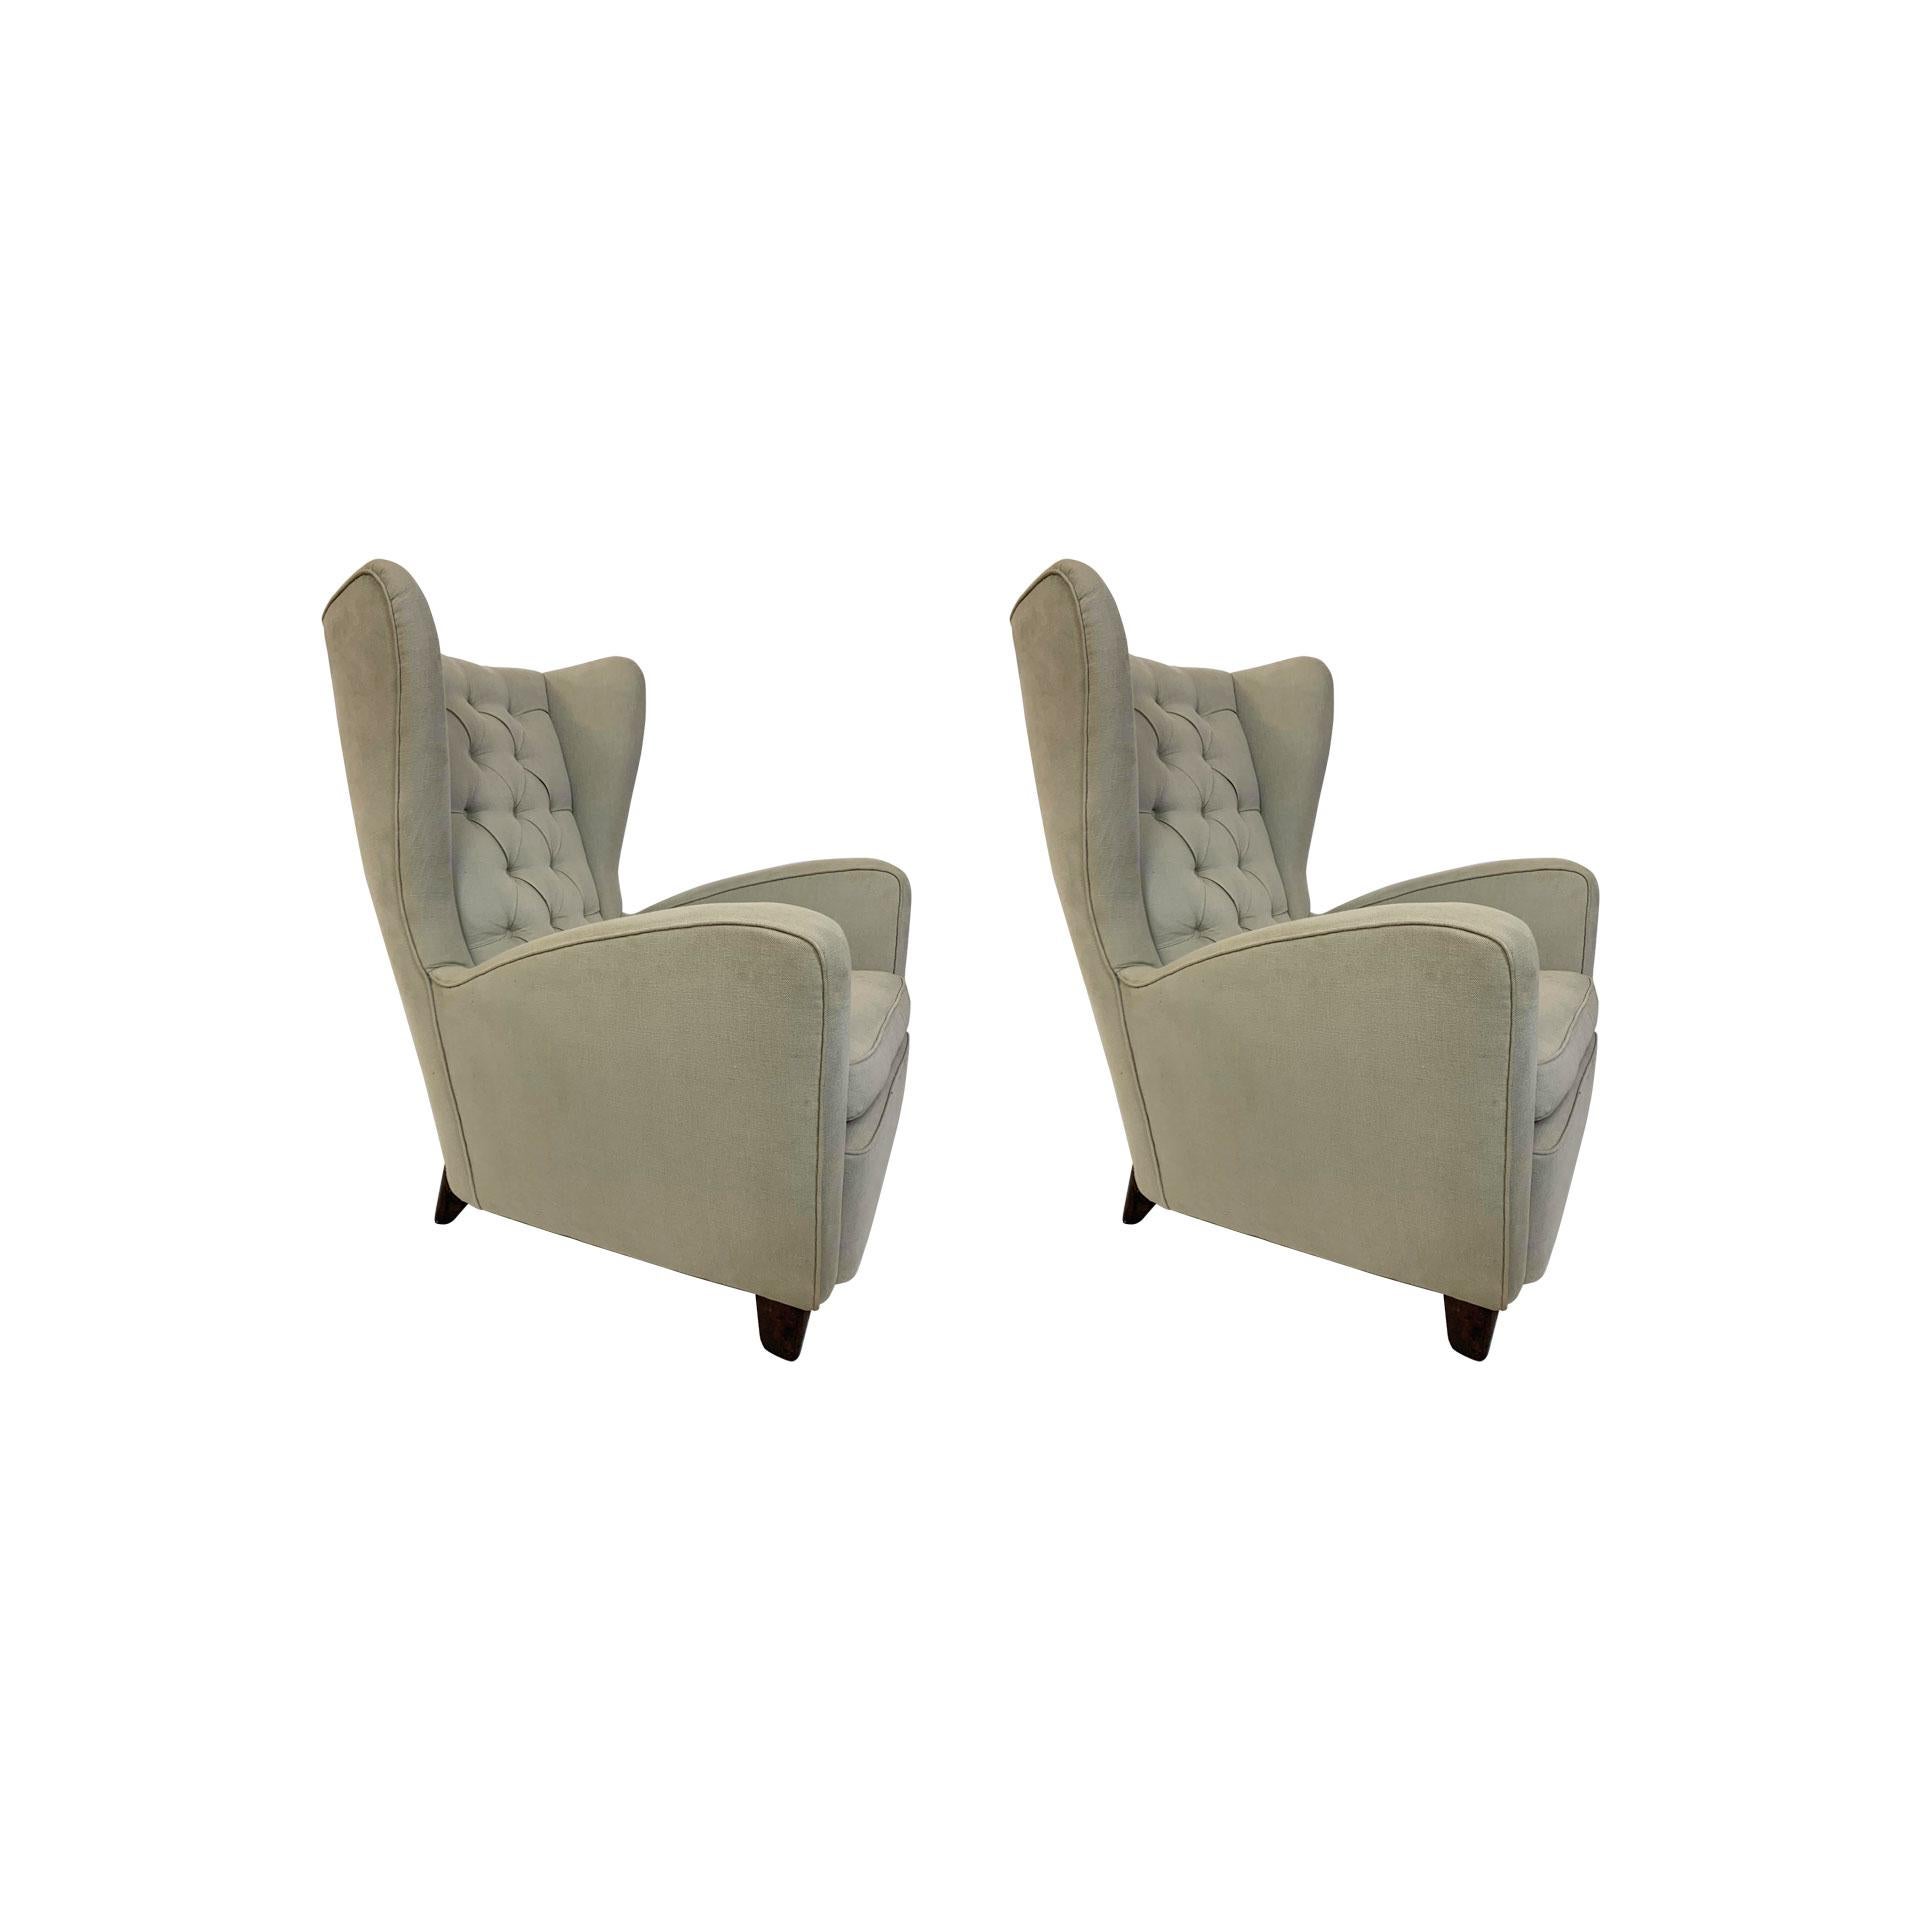 Pair of very beautiful armchairs bergère designed by Ico Parisi in 1950s for Ariberto Colombo, Cantù. The couple of Armchairs are in very good condition.
Published in: Lietti F., “Ico Parisi. Design. Catalogo ragionato 1936-1960”, Silvana Editore,